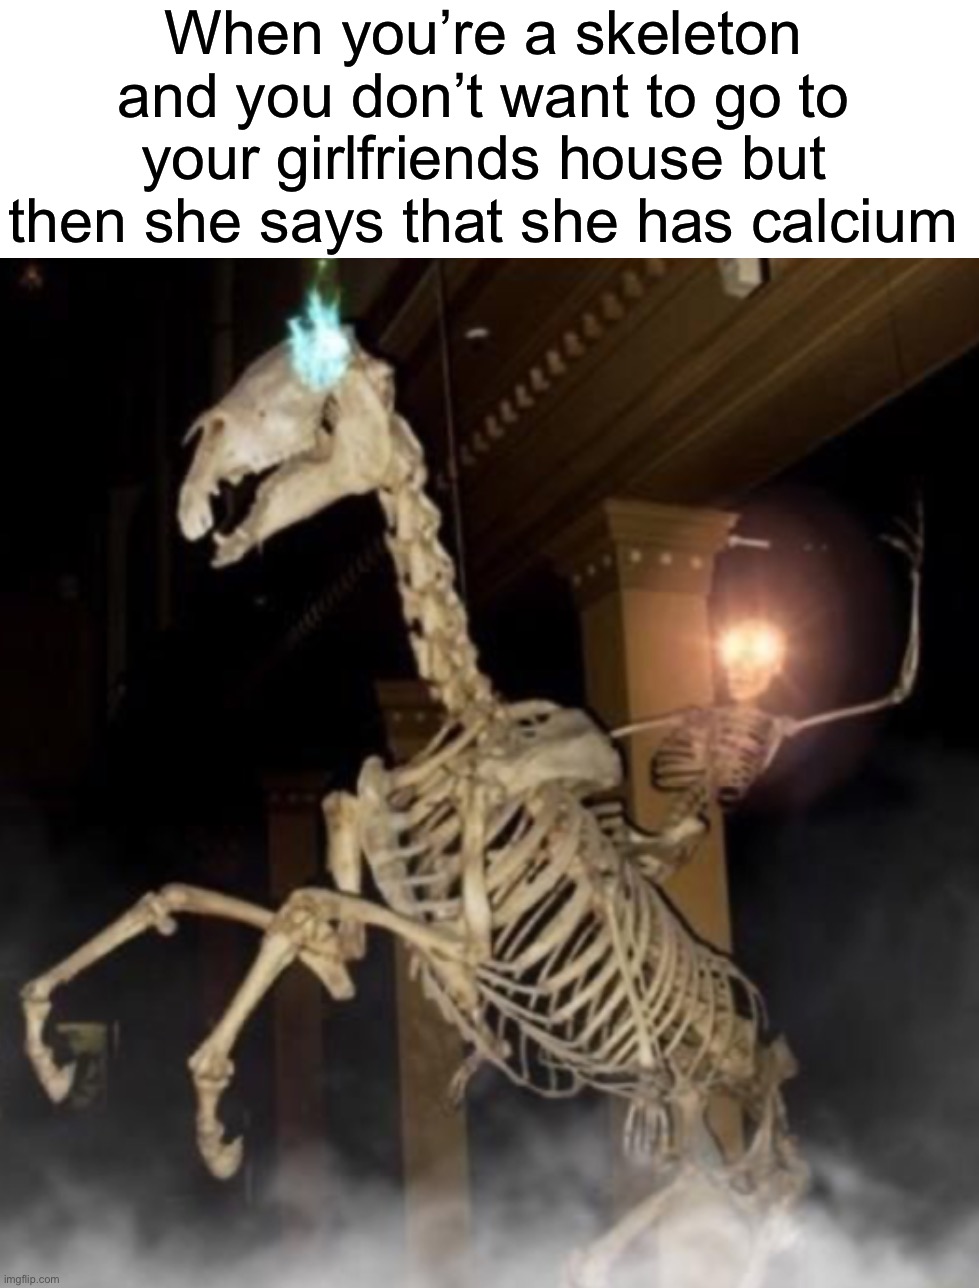 ☠️ Count me in ☠️ |  When you’re a skeleton and you don’t want to go to your girlfriends house but then she says that she has calcium | image tagged in memes,funny,skeleton,spooky month,spooktober,halloween | made w/ Imgflip meme maker